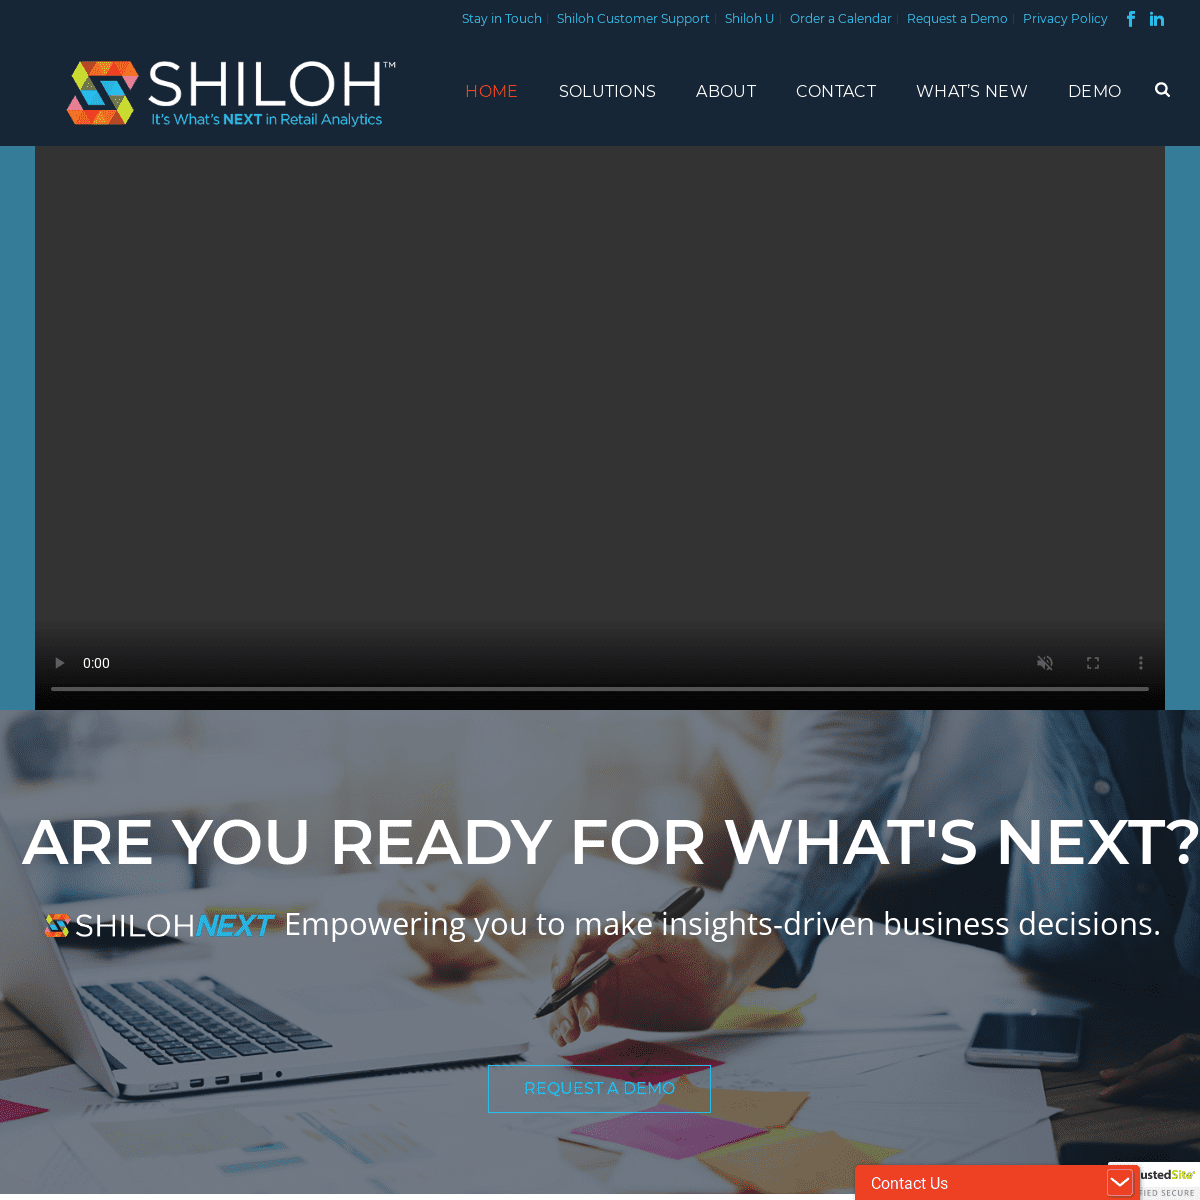 A complete backup of shilohnext.com